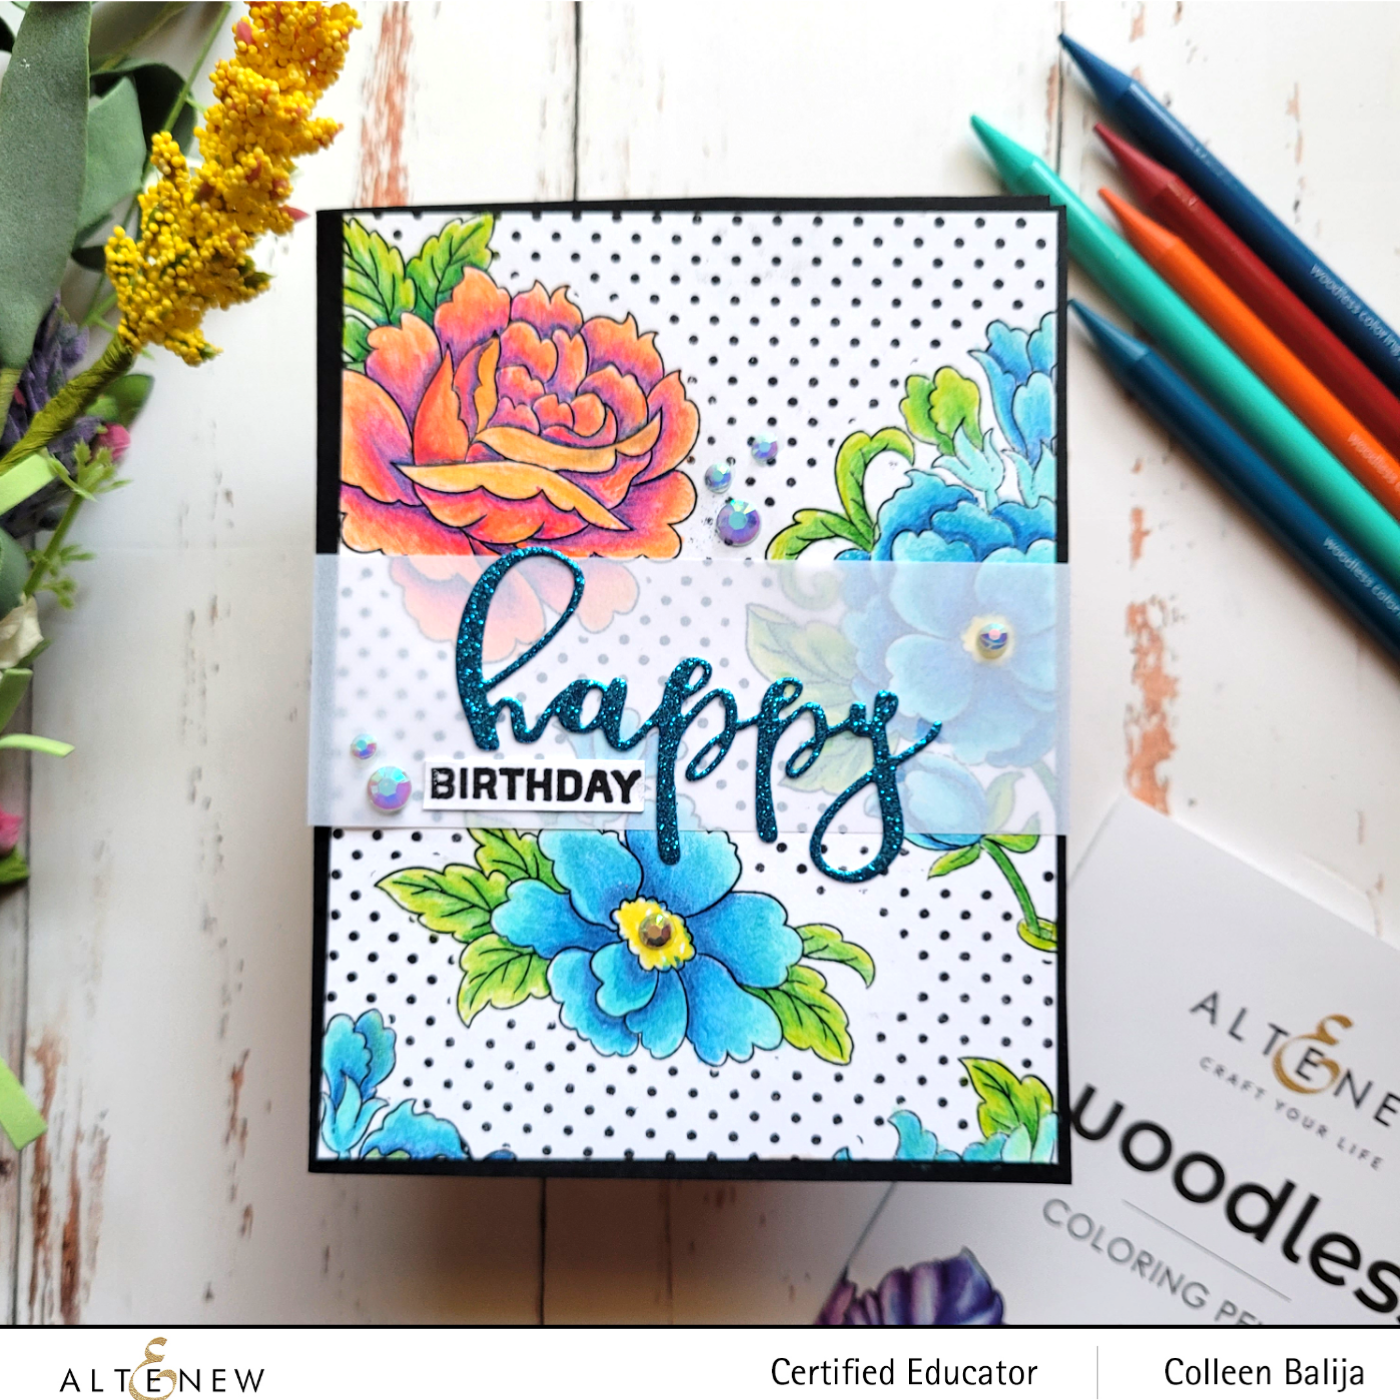 Woodless Coloring Pencils & Flowers and A Flamingo Stamp Set Bundle